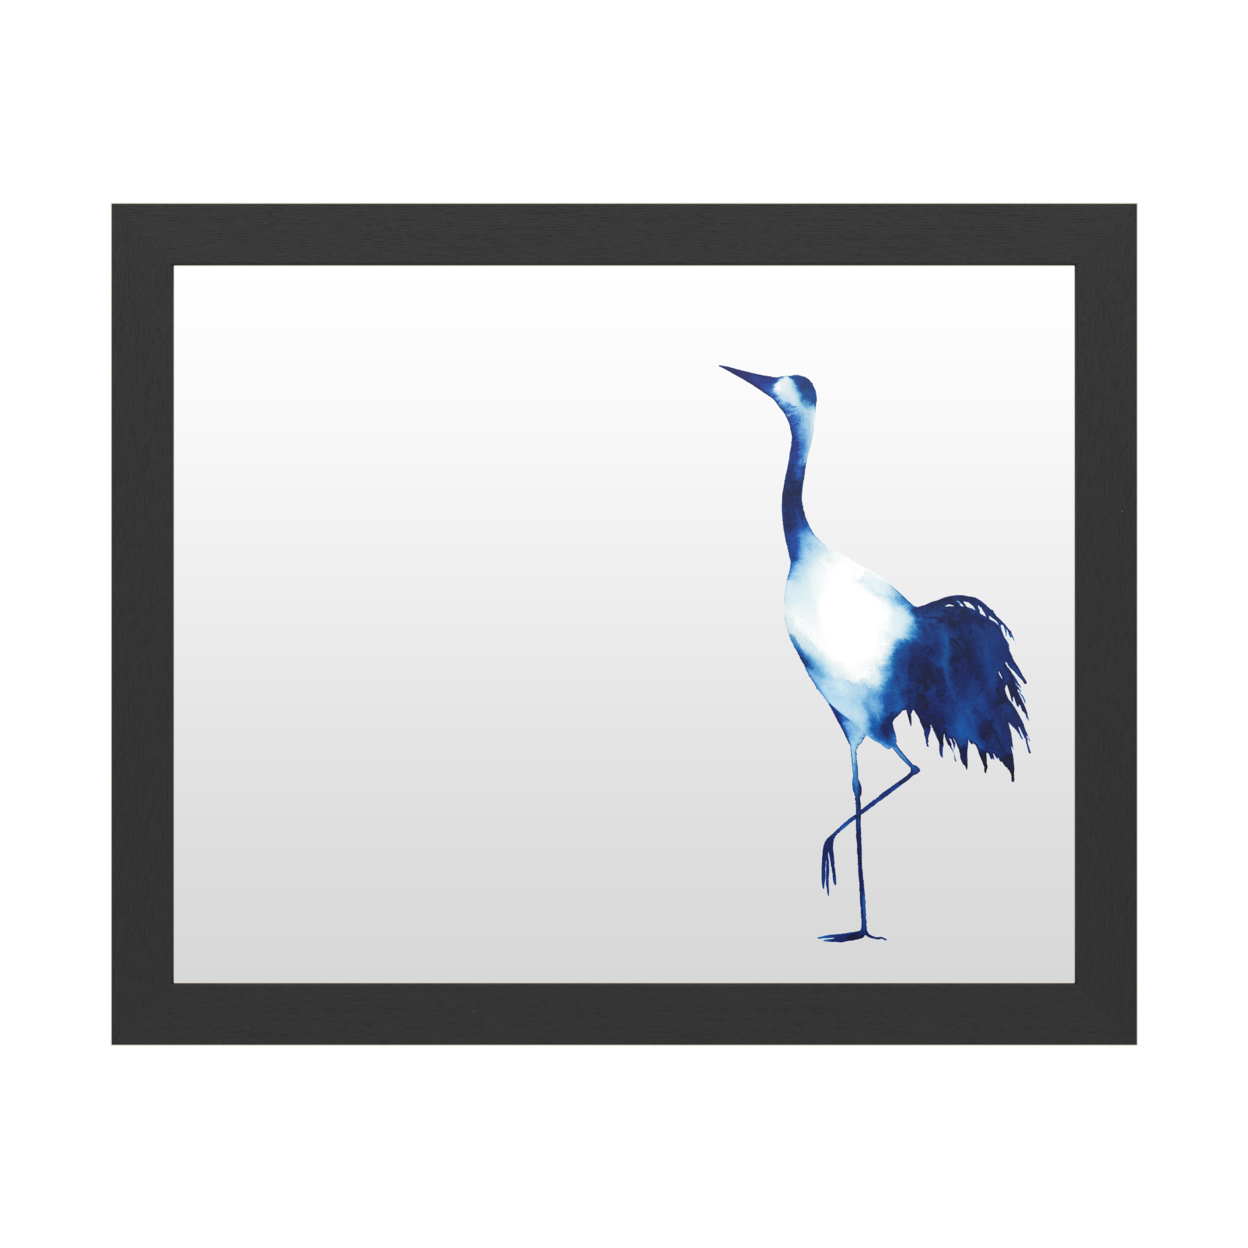 Dry Erase 16 X 20 Marker Board With Printed Artwork - Grace Popp Ink Drop Crane I White Board - Ready To Hang